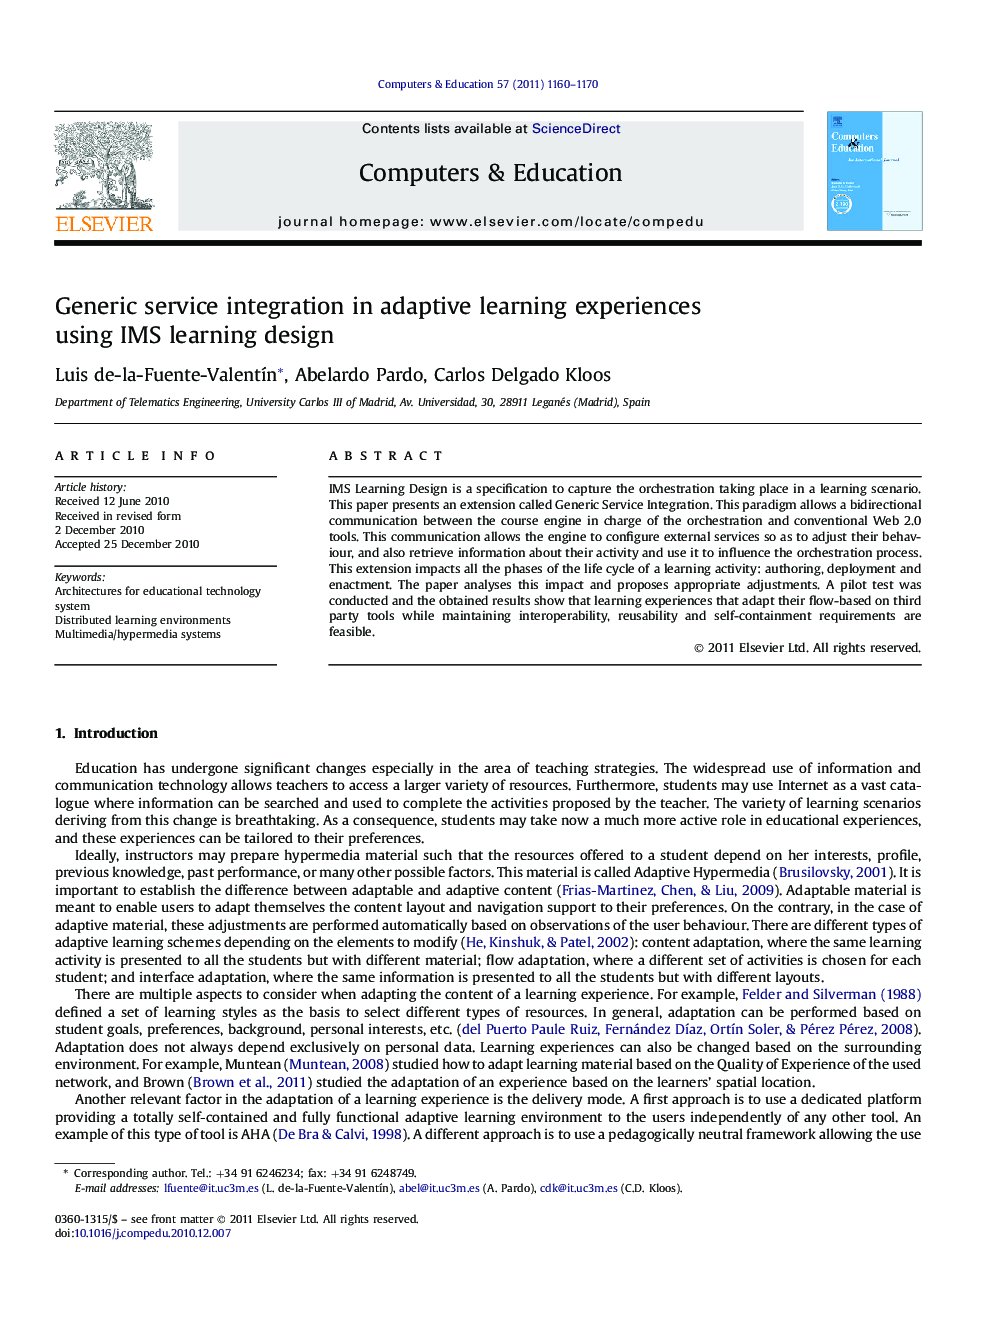 Generic service integration in adaptive learning experiences using IMS learning design